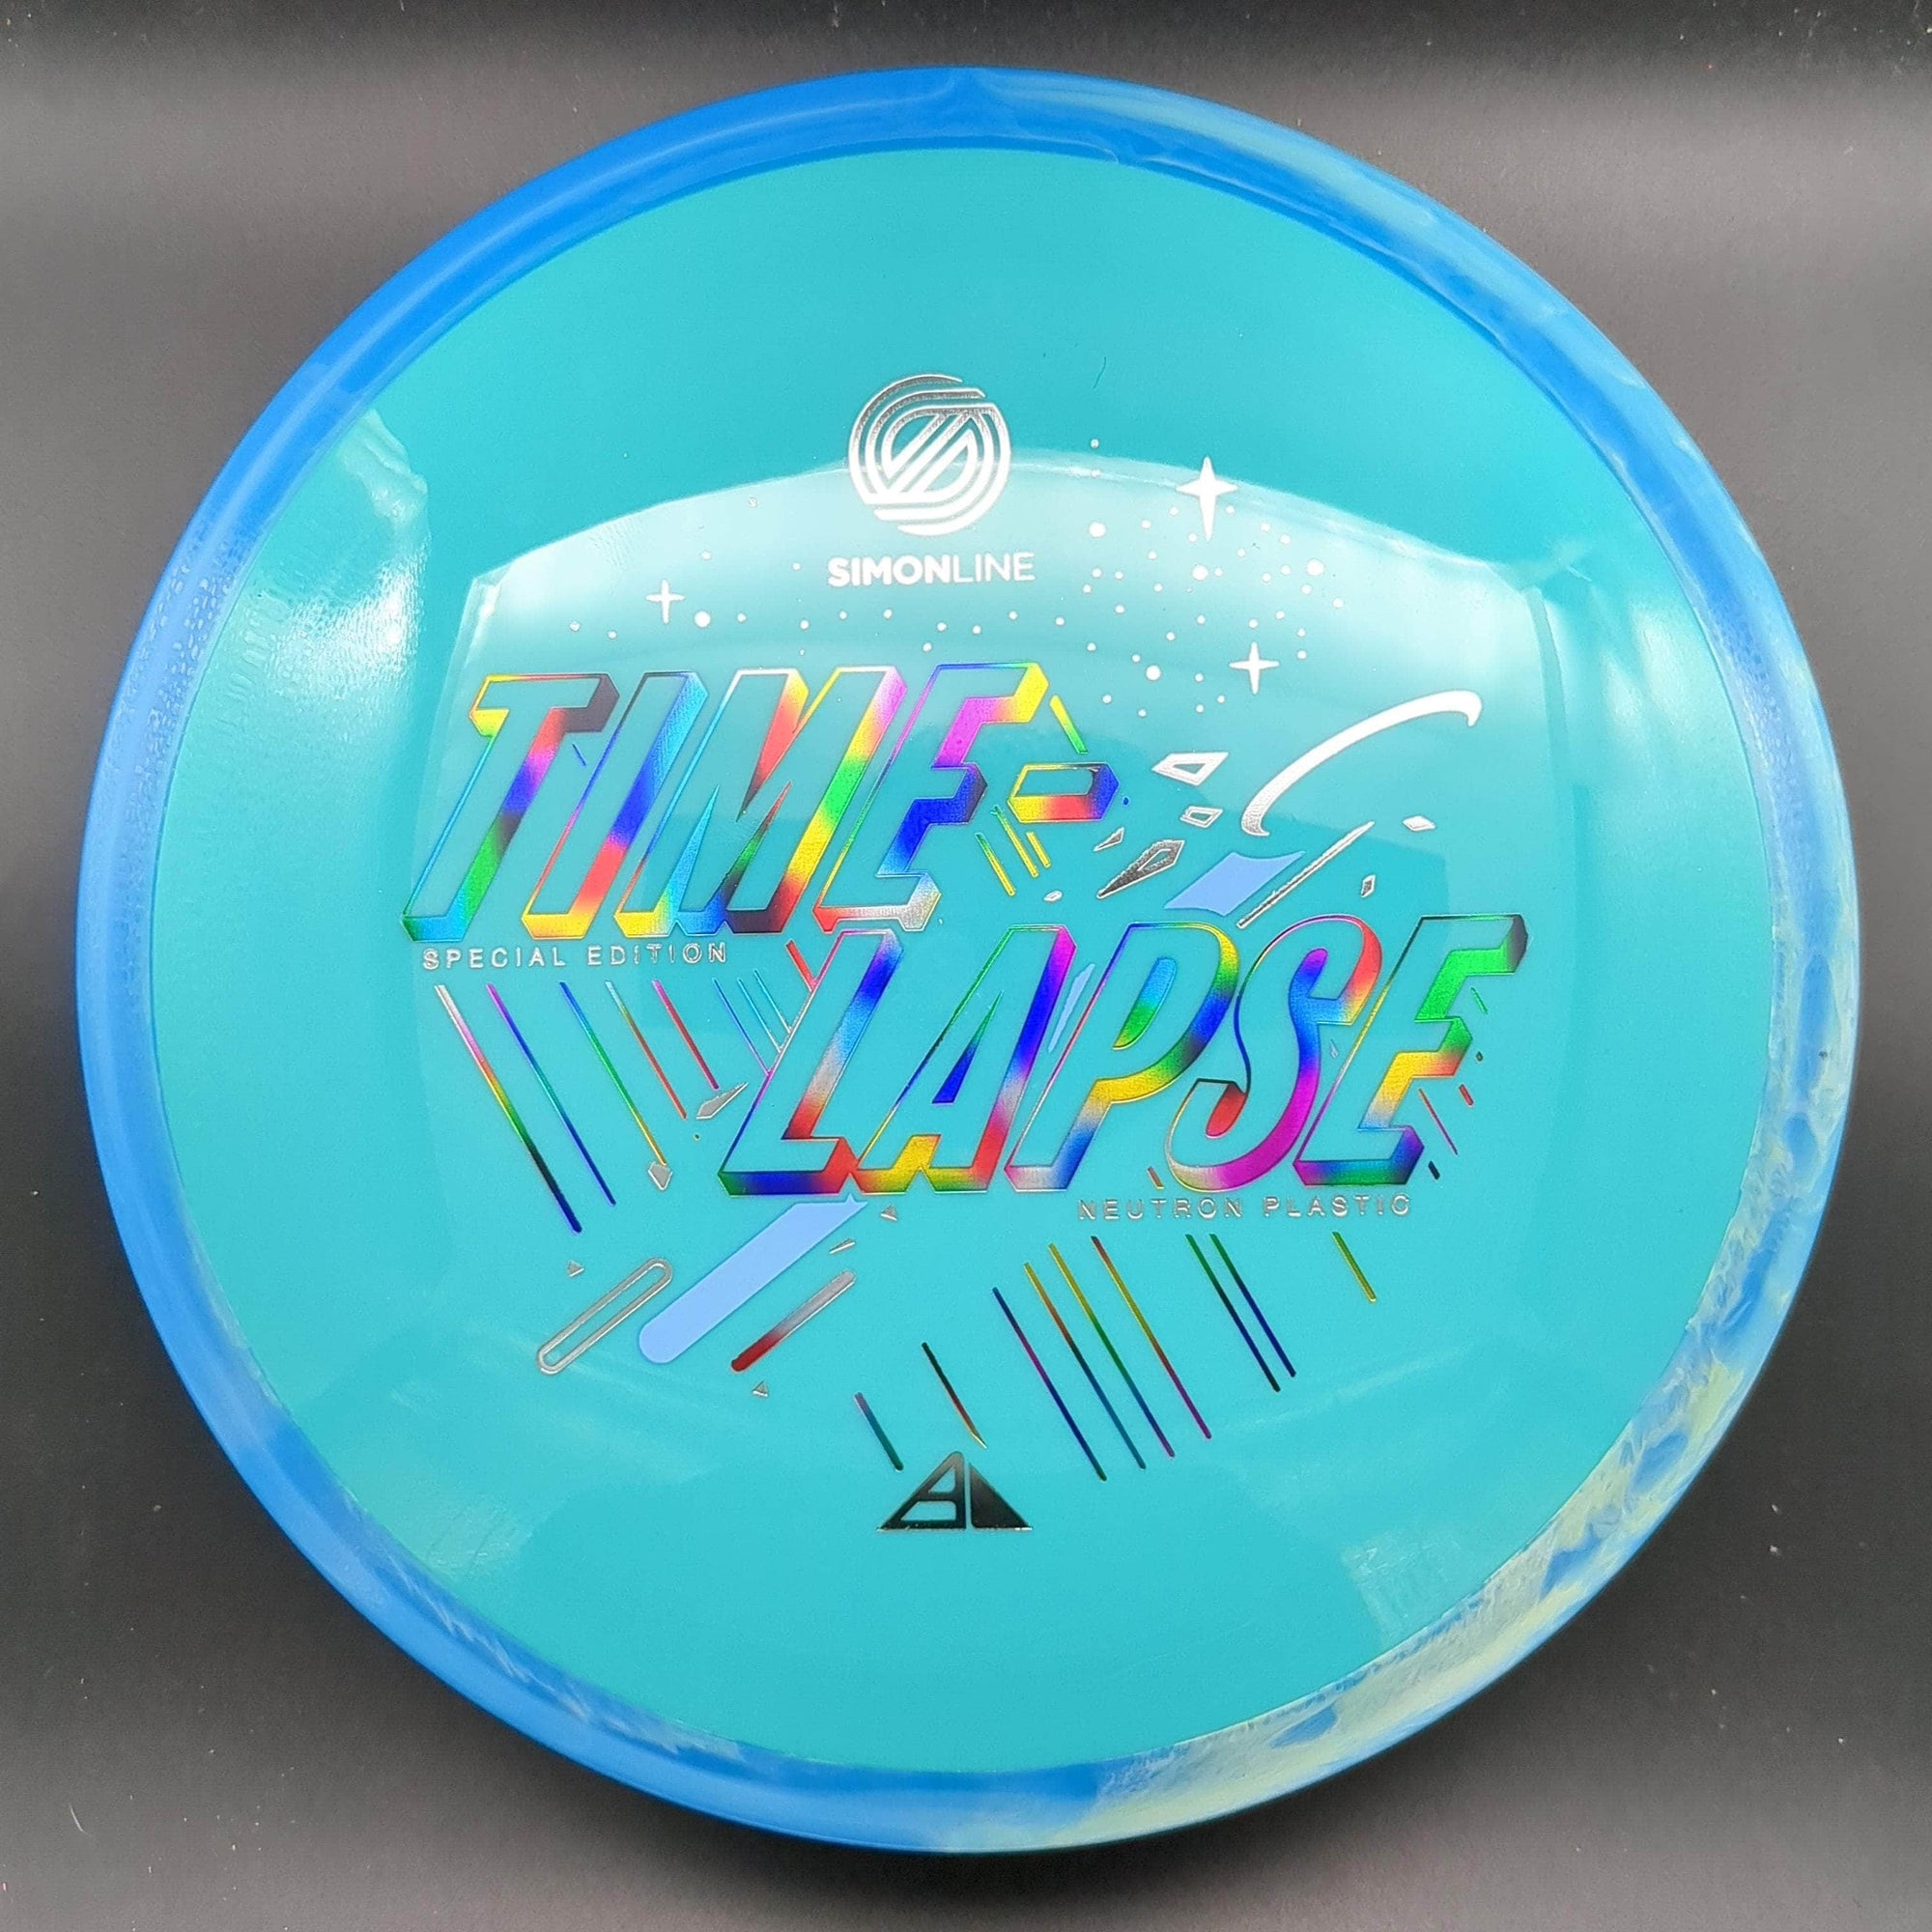 Axiom Distance Driver Blue/Yellow Rim Teal 174g Time Lapse, Neutron, Special Edition